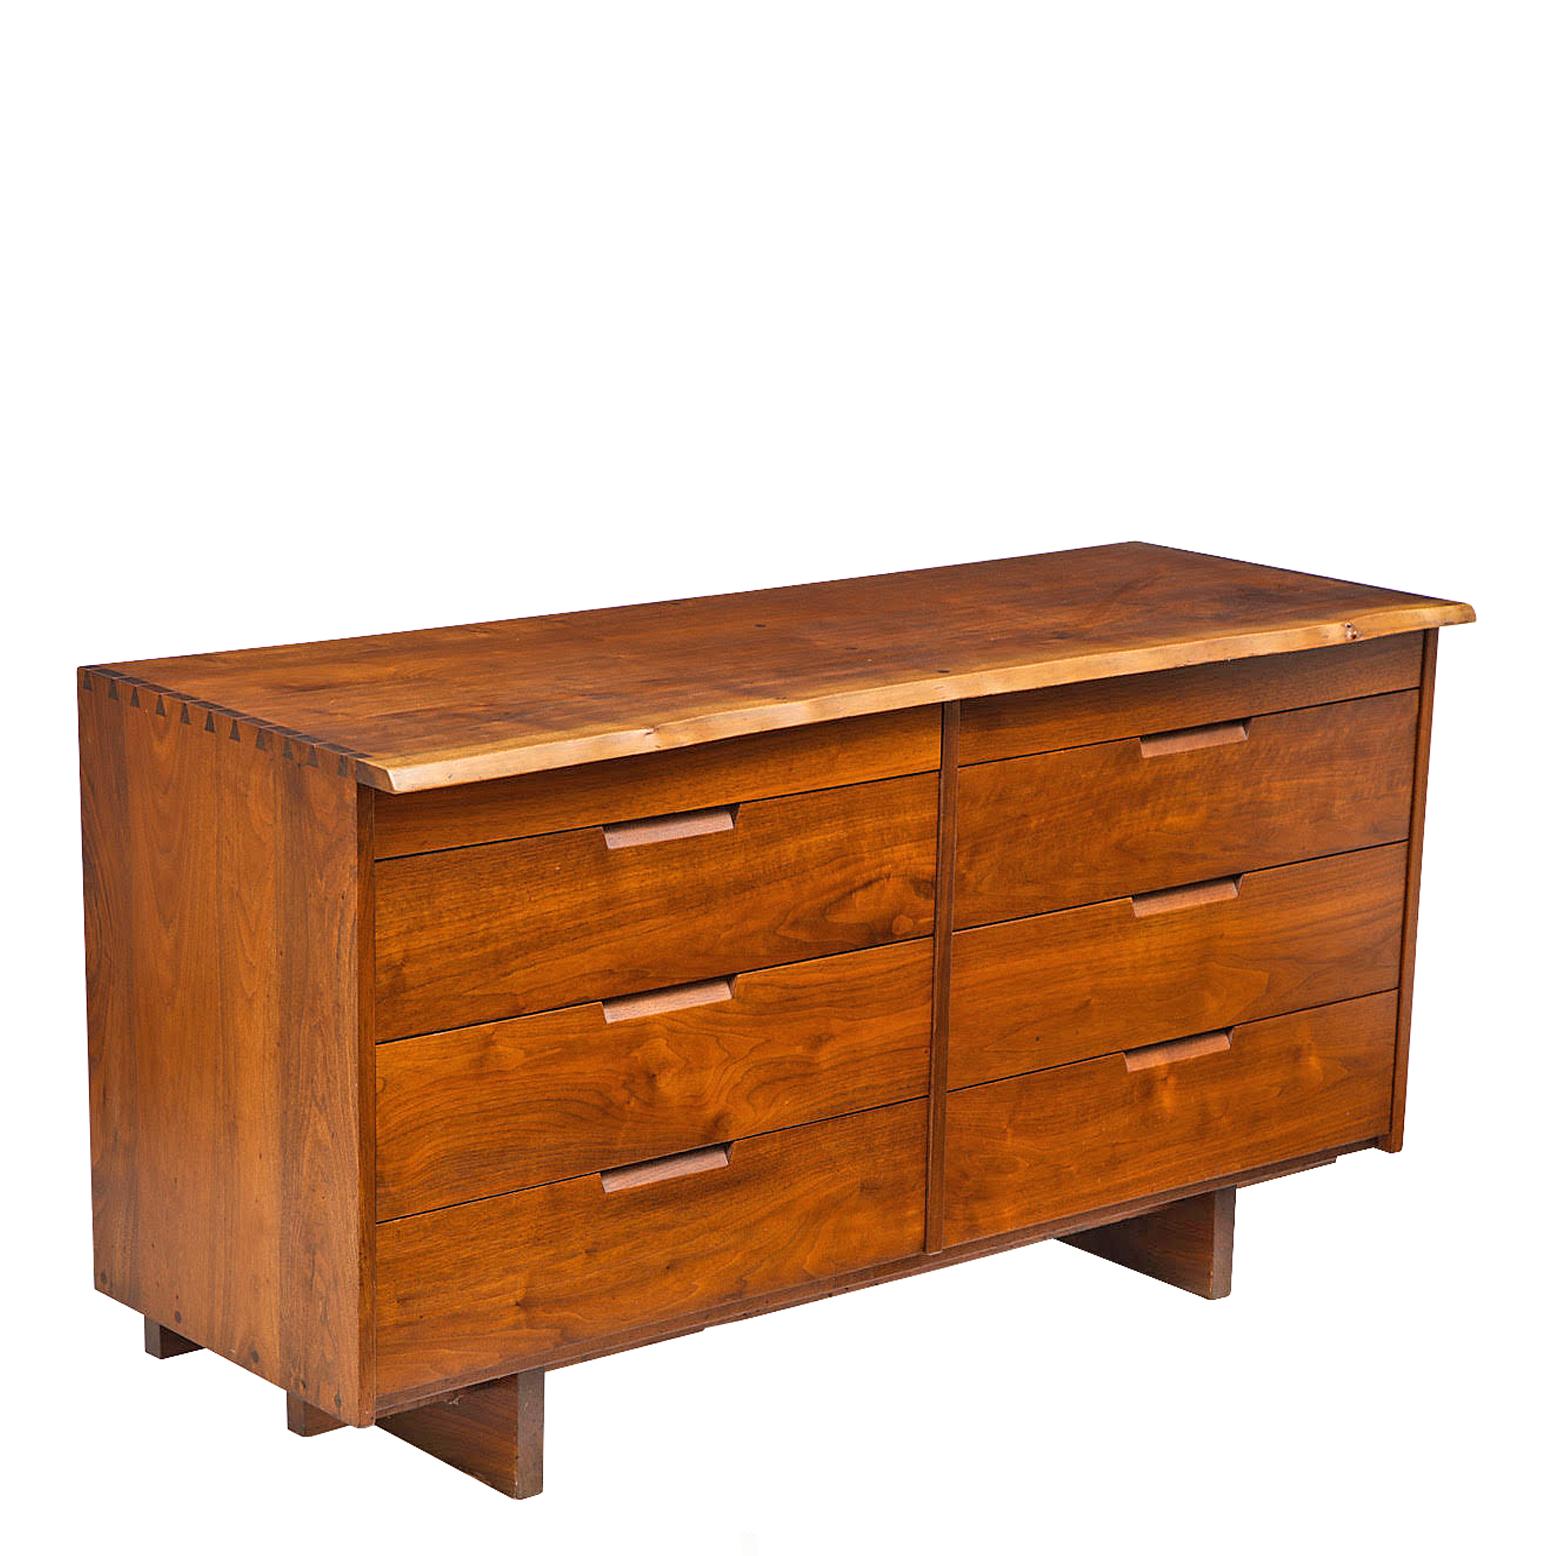 Solid walnut chest of drawer with free edge front and cabinets makers details, made in George Nakashima Studio circa 1970s.